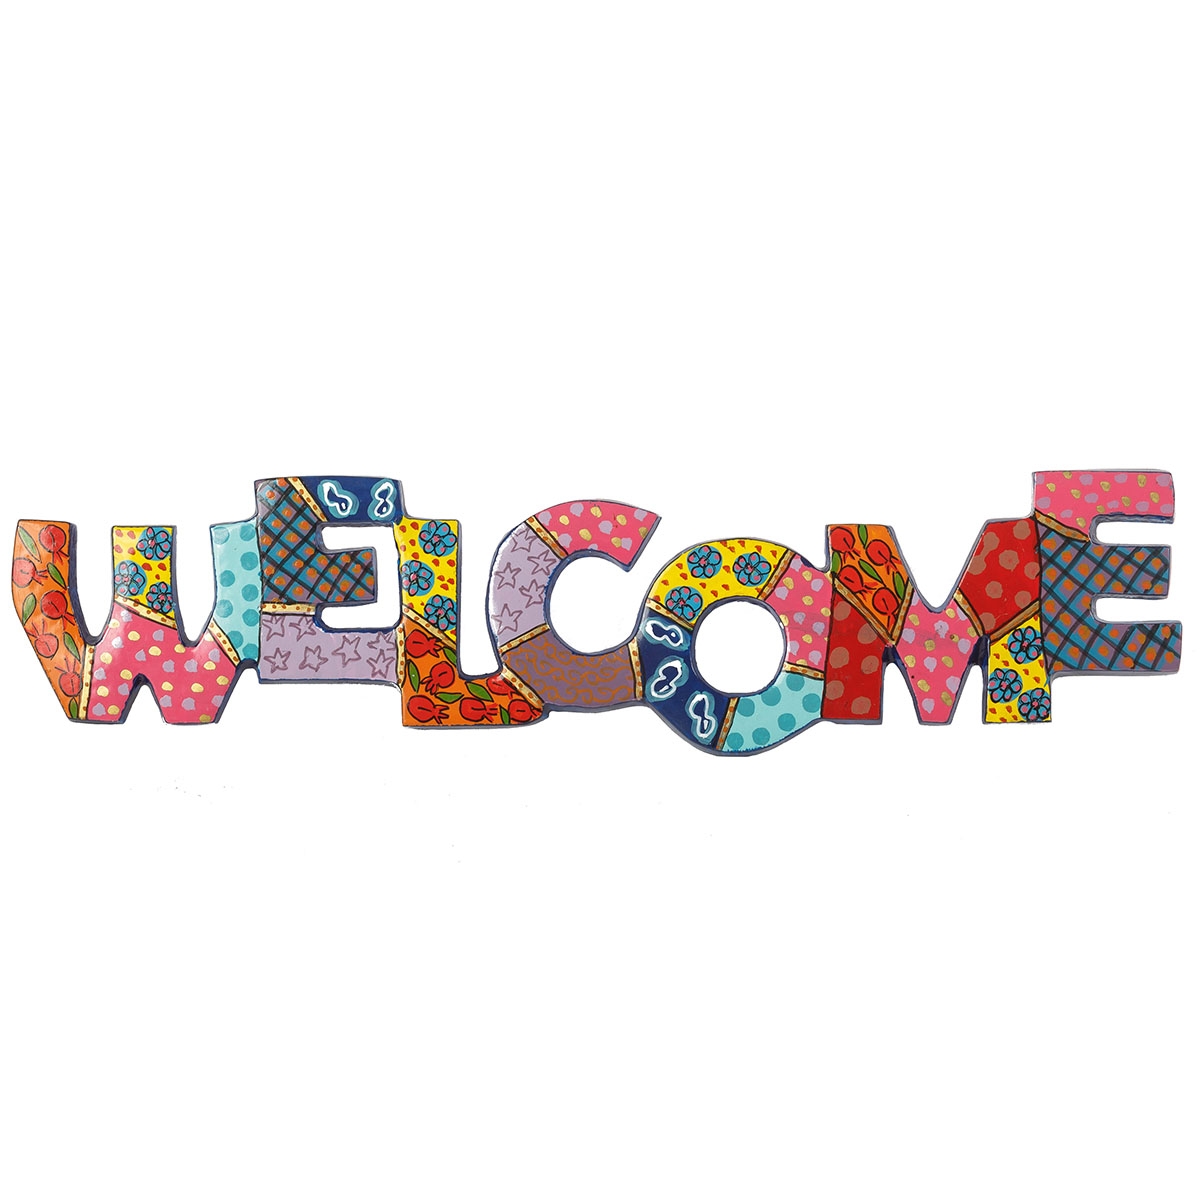 Yair Emanuel Patterned English Welcome Sign - Multicolored - 1